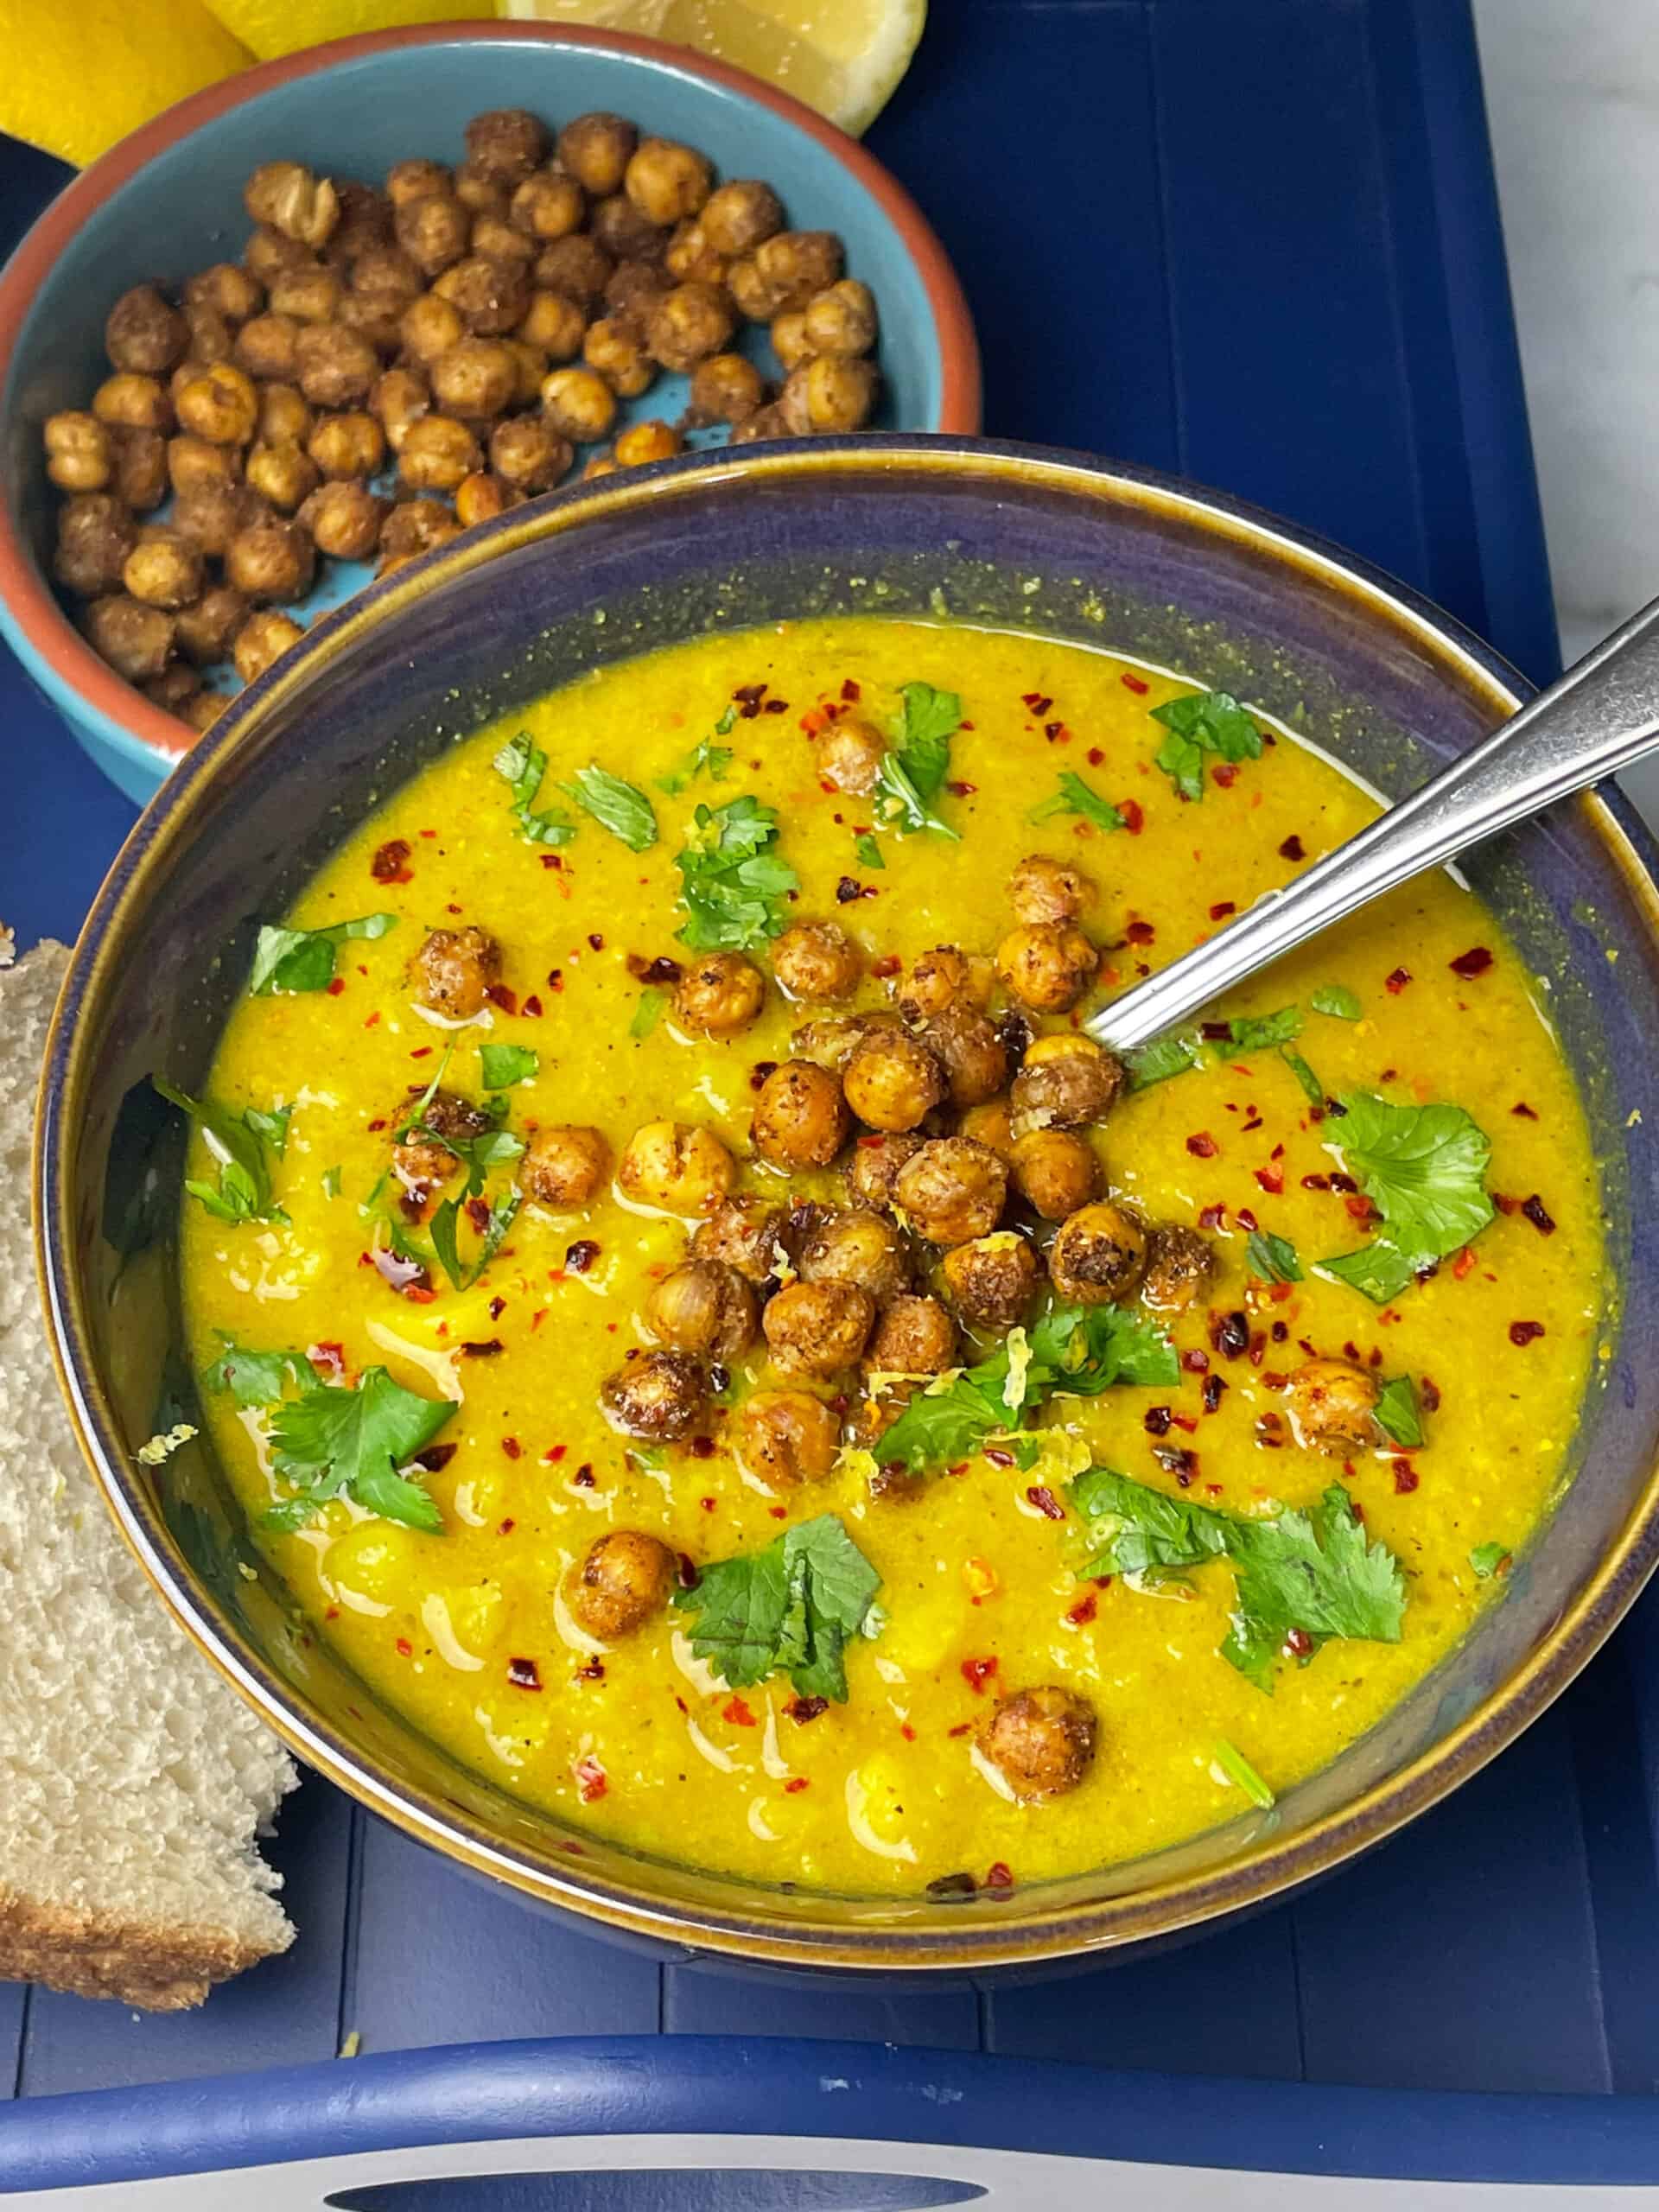 Bowl of curried cauliflower soup in blue bowl, slices of bread to side, roast chickpeas above, silver spoon and all sitting on blue tray.